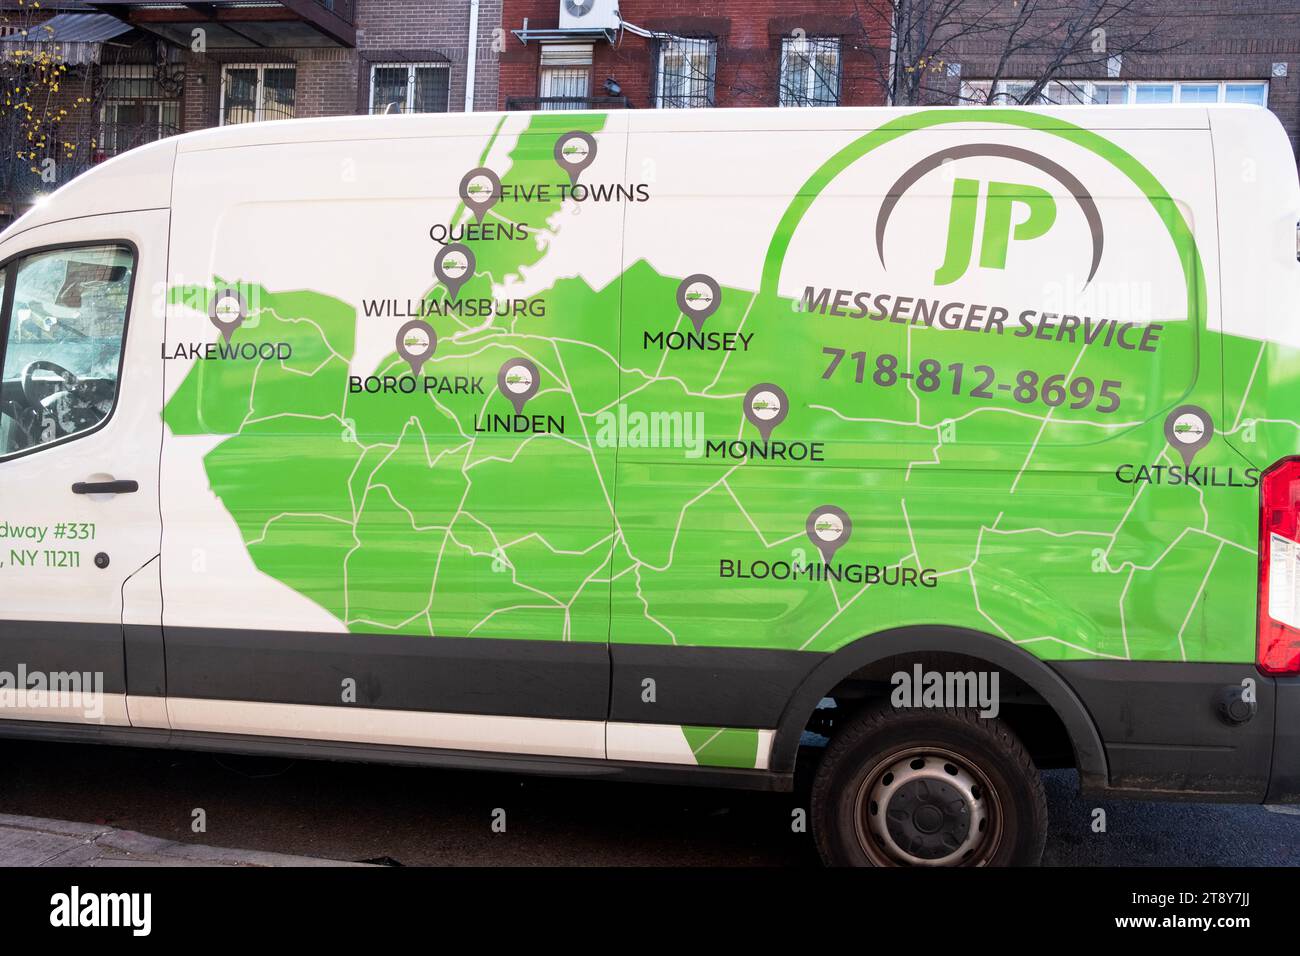 A parked JP Messenger truck with a map showing deliveries to various orthodox Jewish neighborhoods. As seen on Lee Ave. in Williamsburg, Brooklyn, NYC. Stock Photo